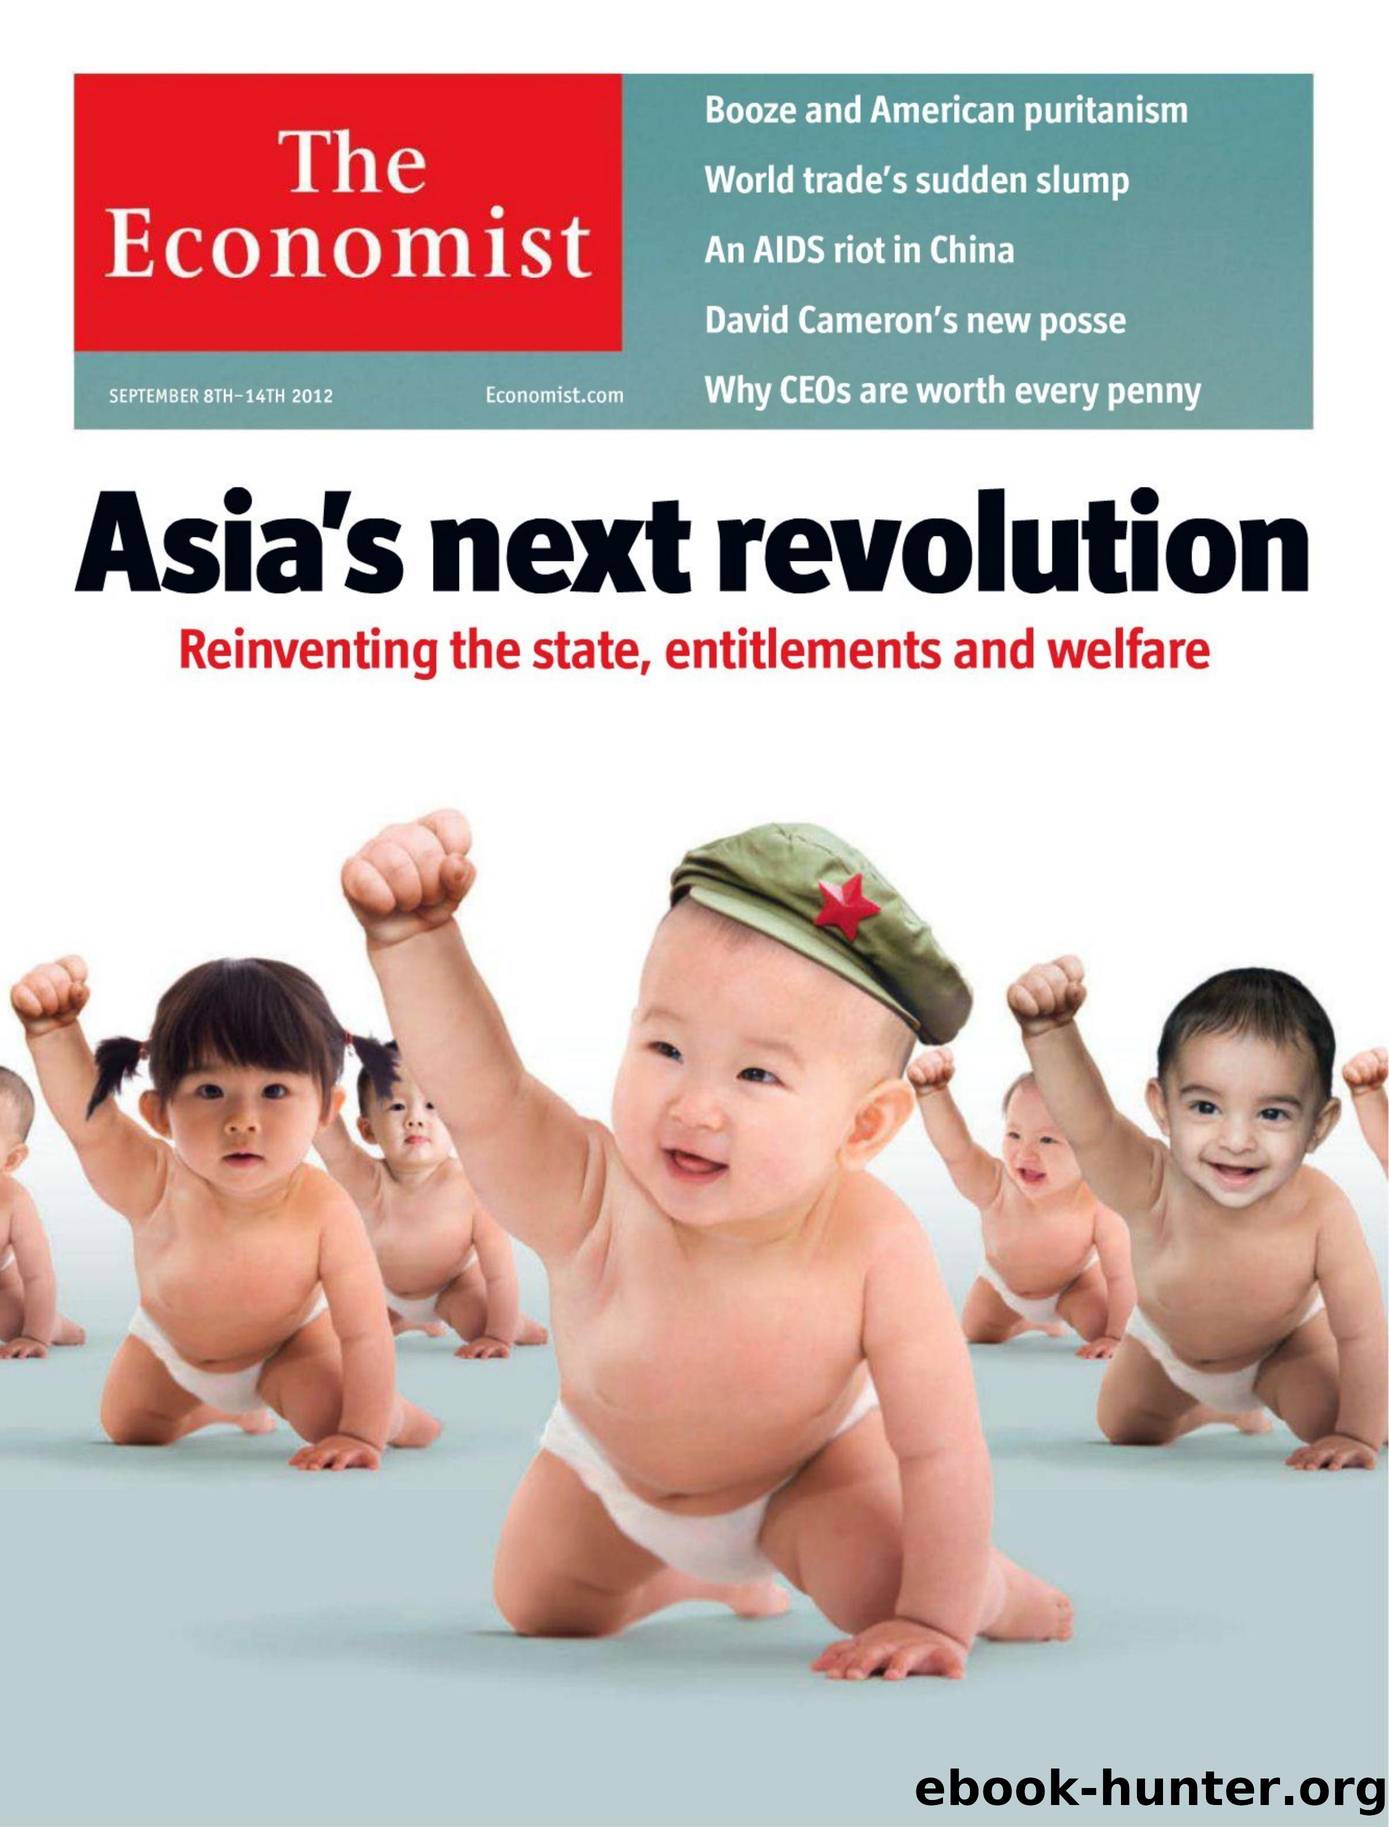 The Economist by N.8801 09-08-2012